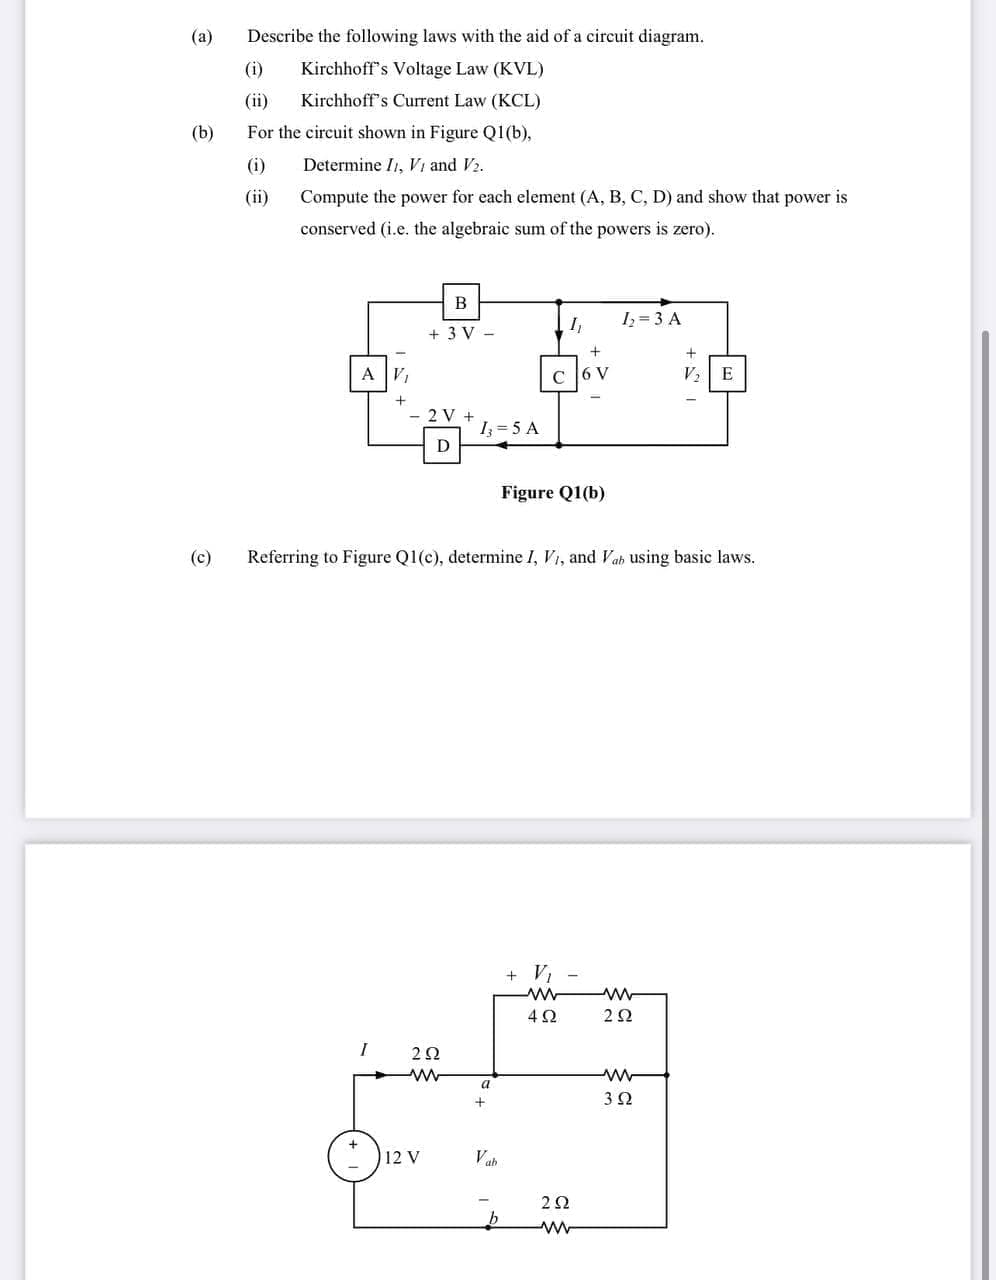 (a)
Describe the following laws with the aid of a circuit diagram.
(i)
Kirchhoff's Voltage Law (KVL)
(ii)
Kirchhoff's Current Law (KCL)
(b)
For the circuit shown in Figure Q1(b),
(i)
Determine I1, Vi and V2.
(ii)
Compute the power for each element (A, B, C, D) and show that power is
conserved (i.e. the algebraic sum of the powers is zero).
B
I,
Iz = 3 A
+ 3 V -
+
A V,
C [6 V
V2 E
2 V
1 = 5 A
D
Figure Q1(b)
(c)
Referring to Figure Q1(c), determine I, Vi, and Vab using basic laws.
+ V,
4Ω
2Ω
2Ω
a
12 V
Vah
